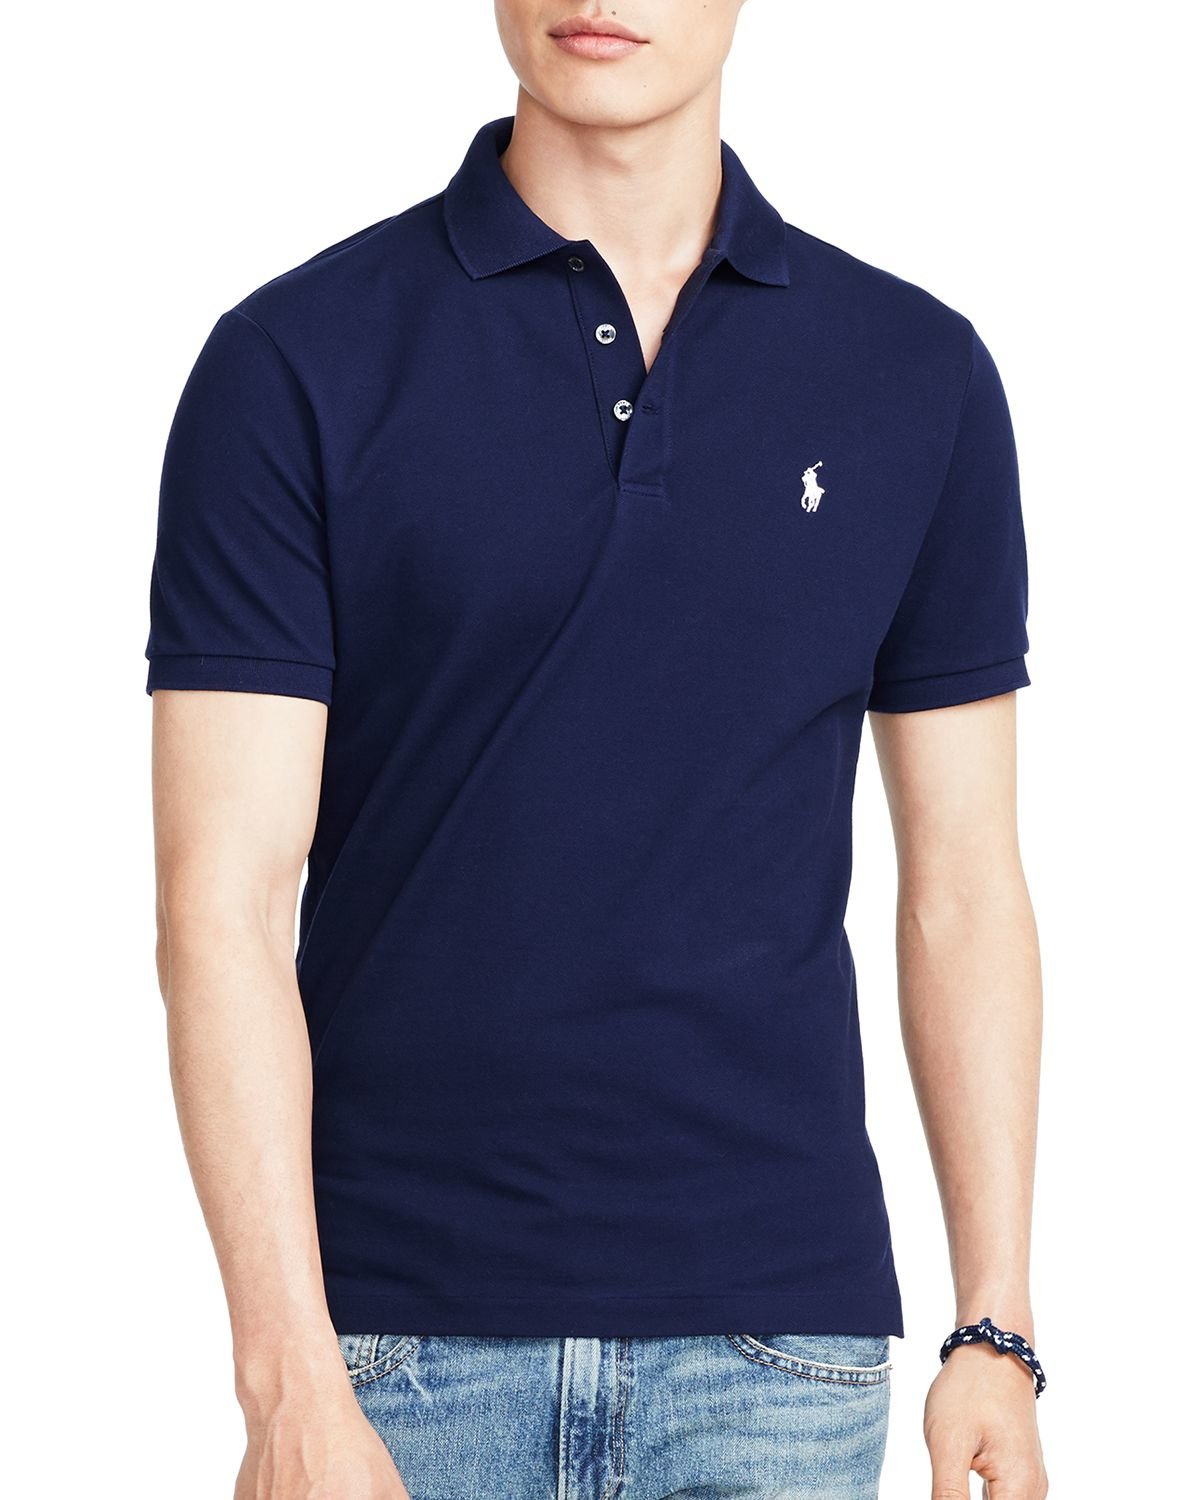 Lyst - Ralph Lauren Polo Stretch-mesh Slim Fit Polo Shirt in Blue for Men